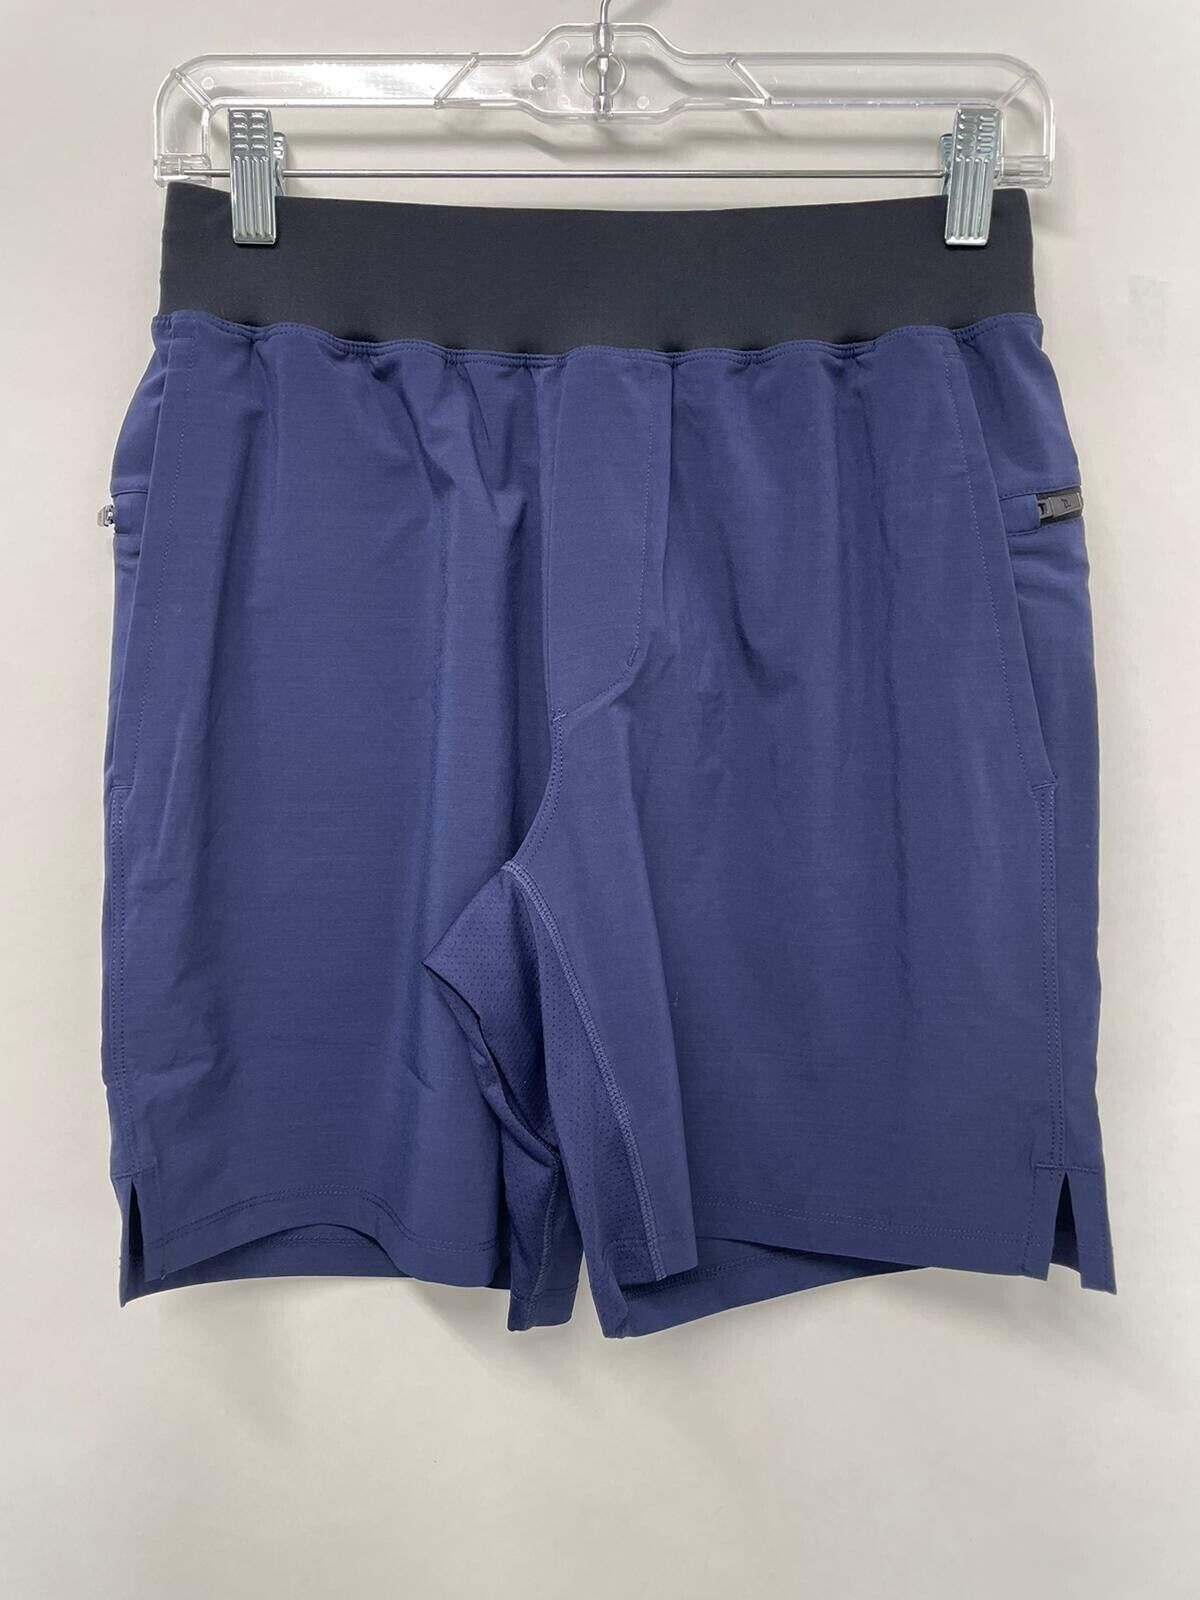 Fabletics Mens XS The Franchise 7" Unlined Active Shorts Navy Blue Gym